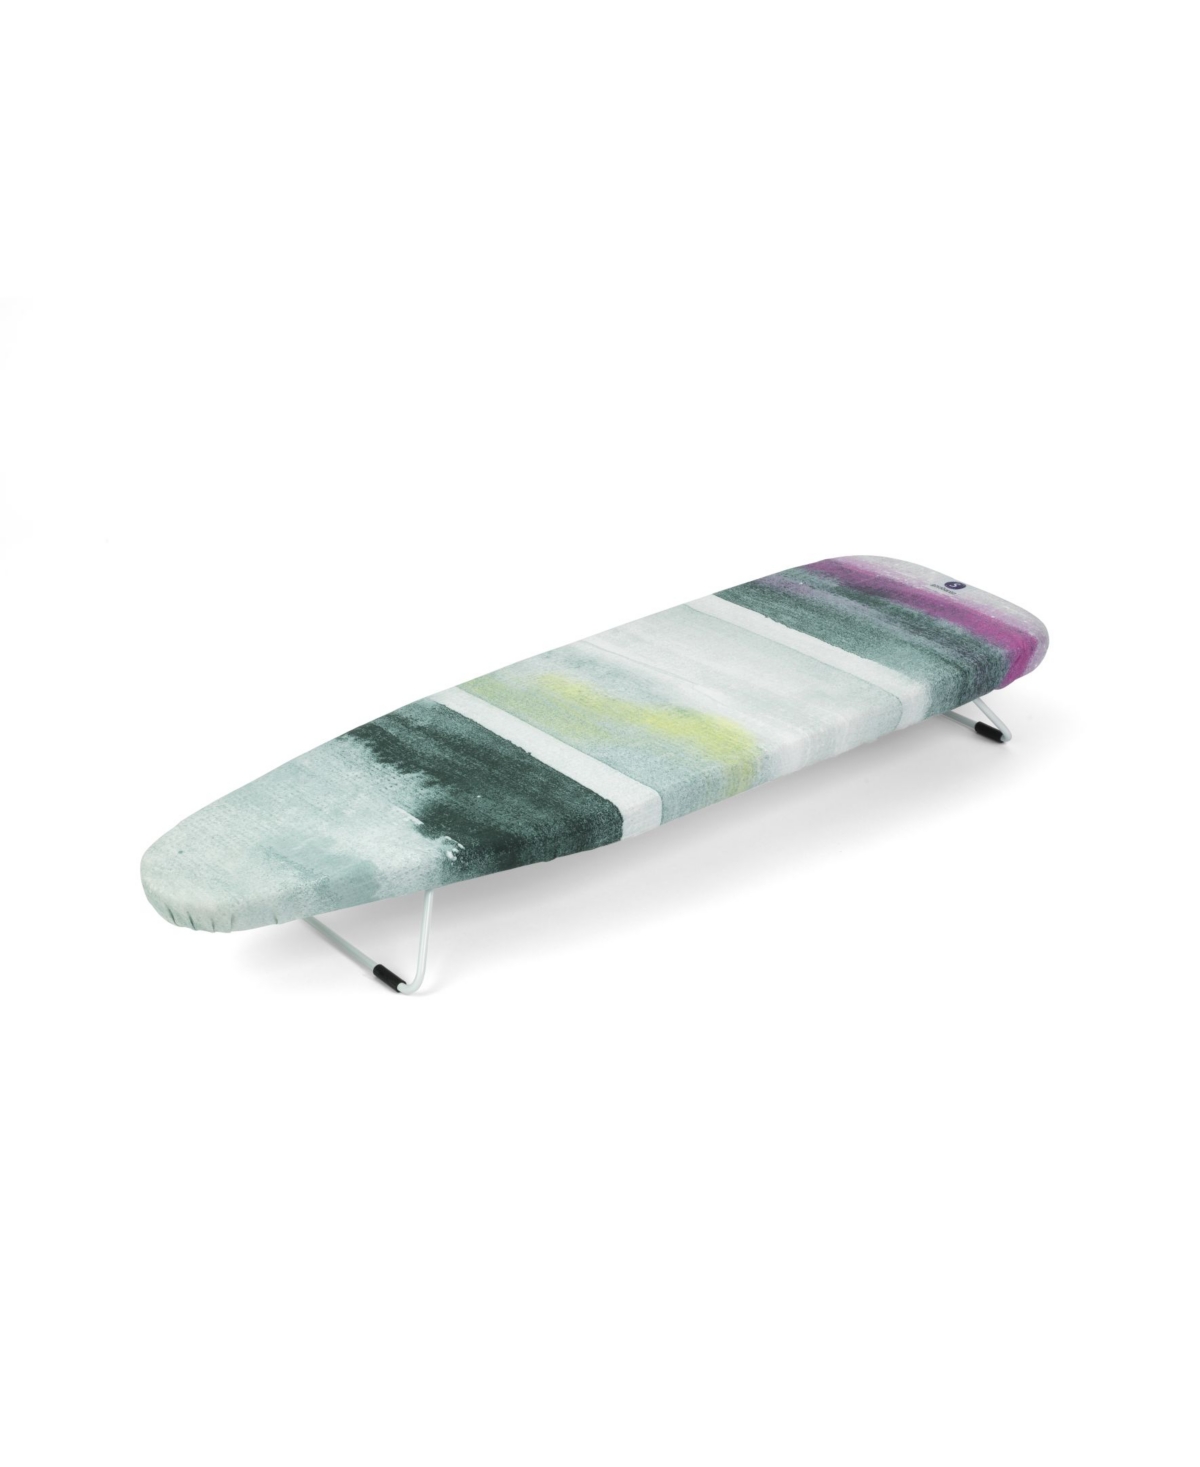 Brabantia Ironing Board S, 37.4 X 12", Table Top In Morning Breeze